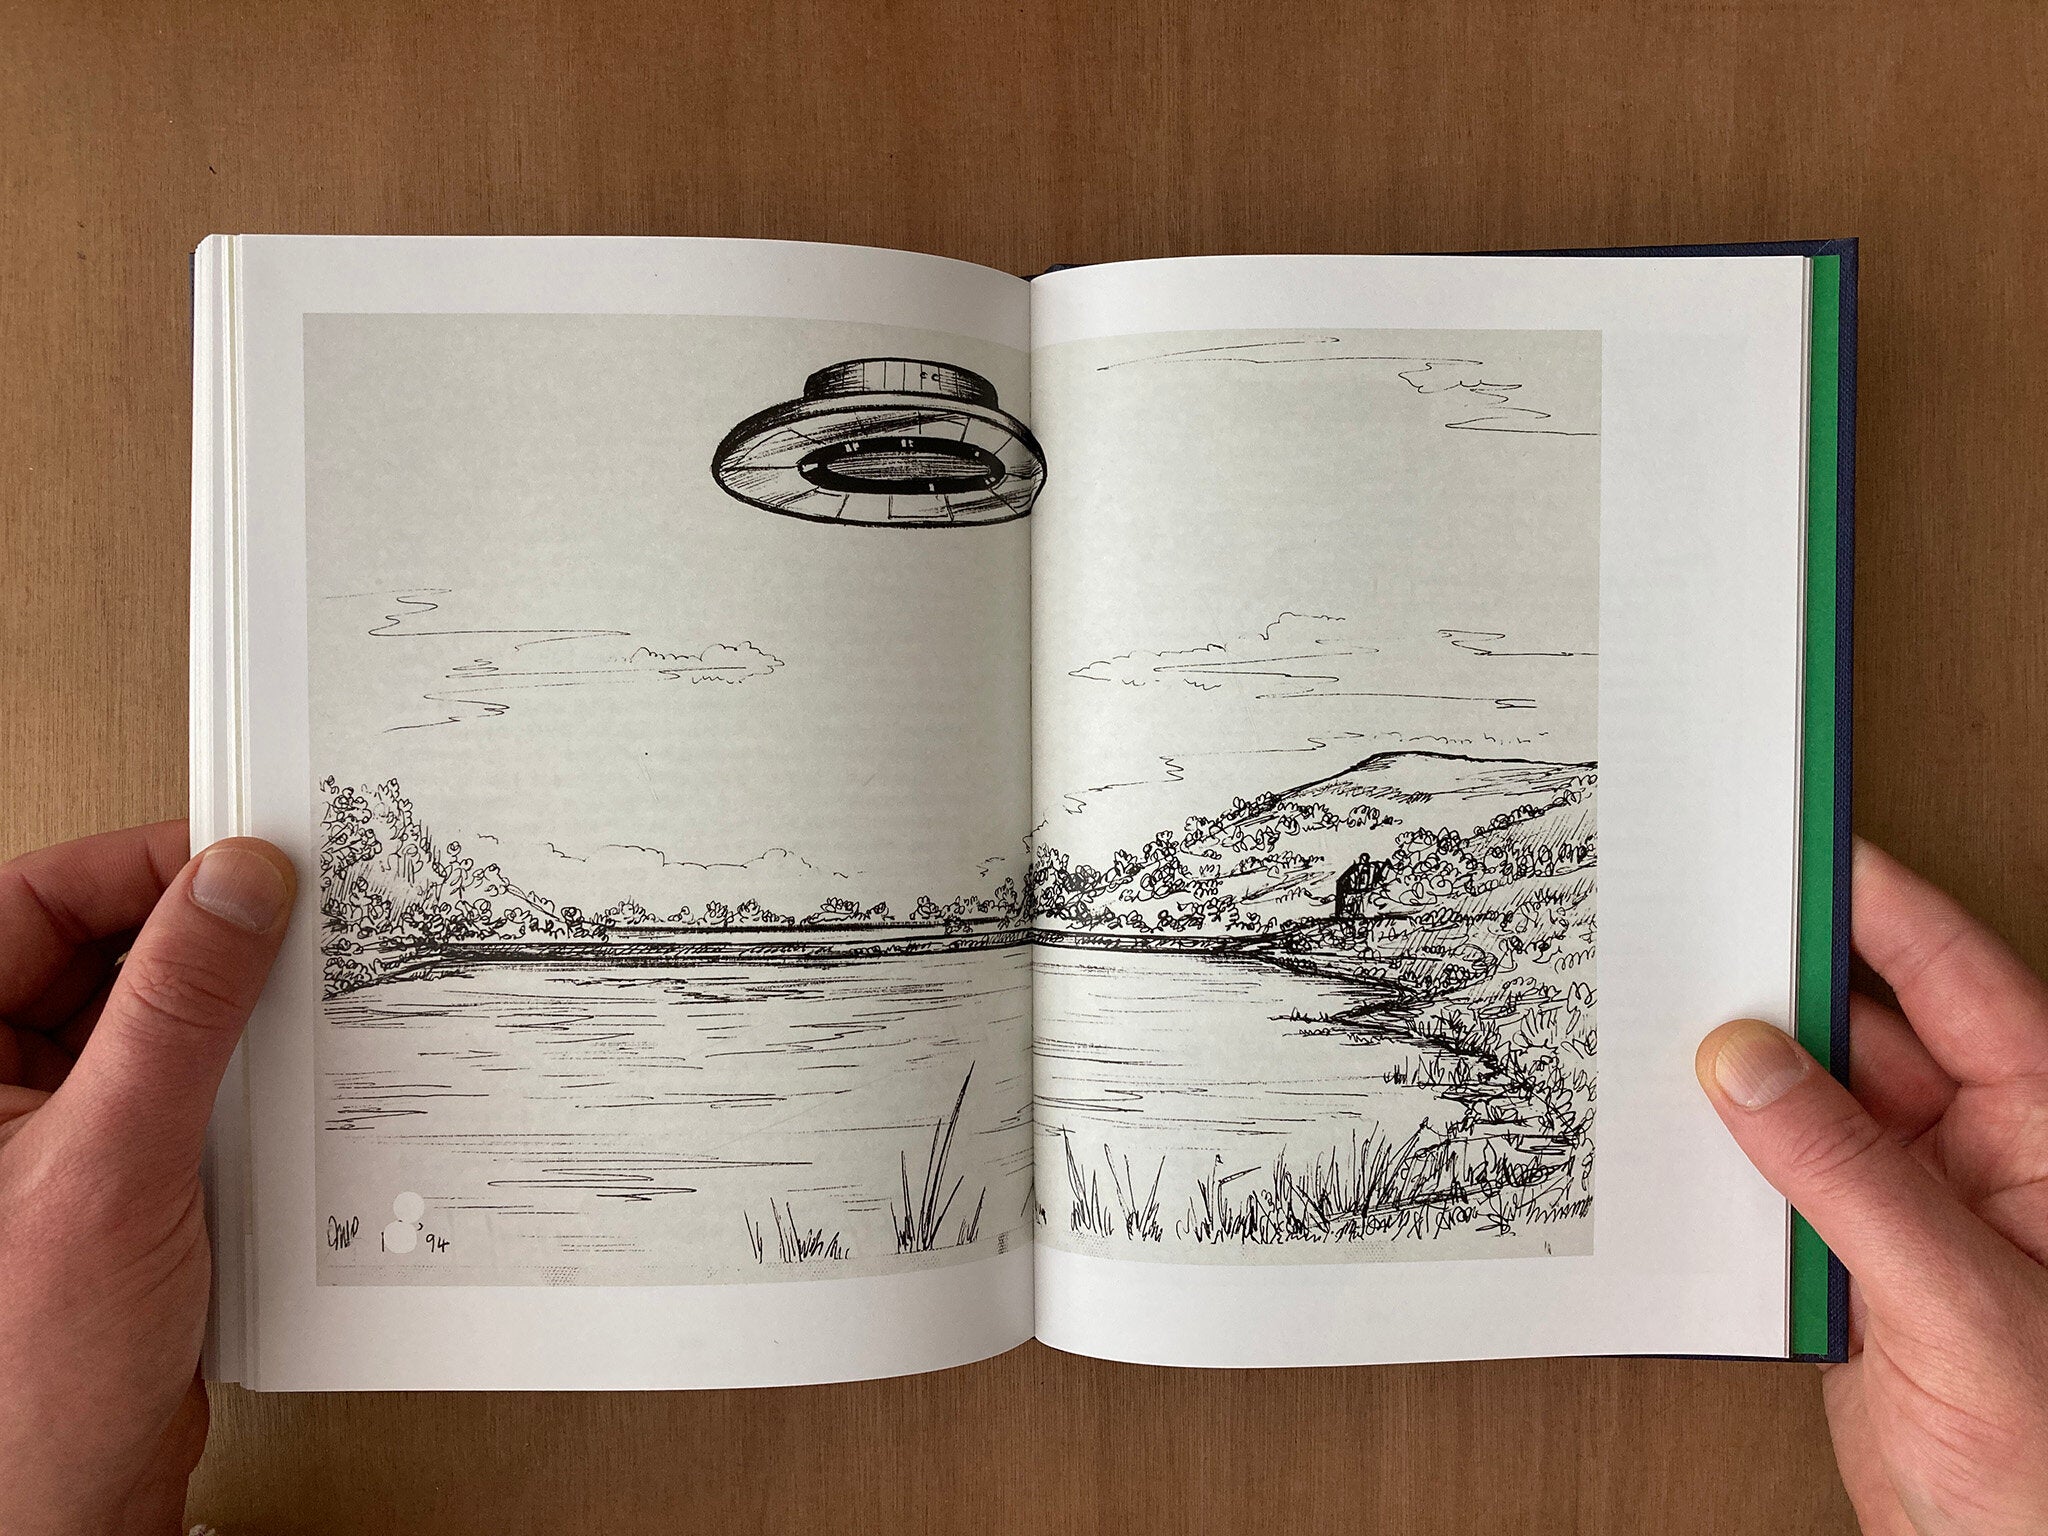 UFO DRAWINGS FROM THE NATIONAL ARCHIVES by David Clarke